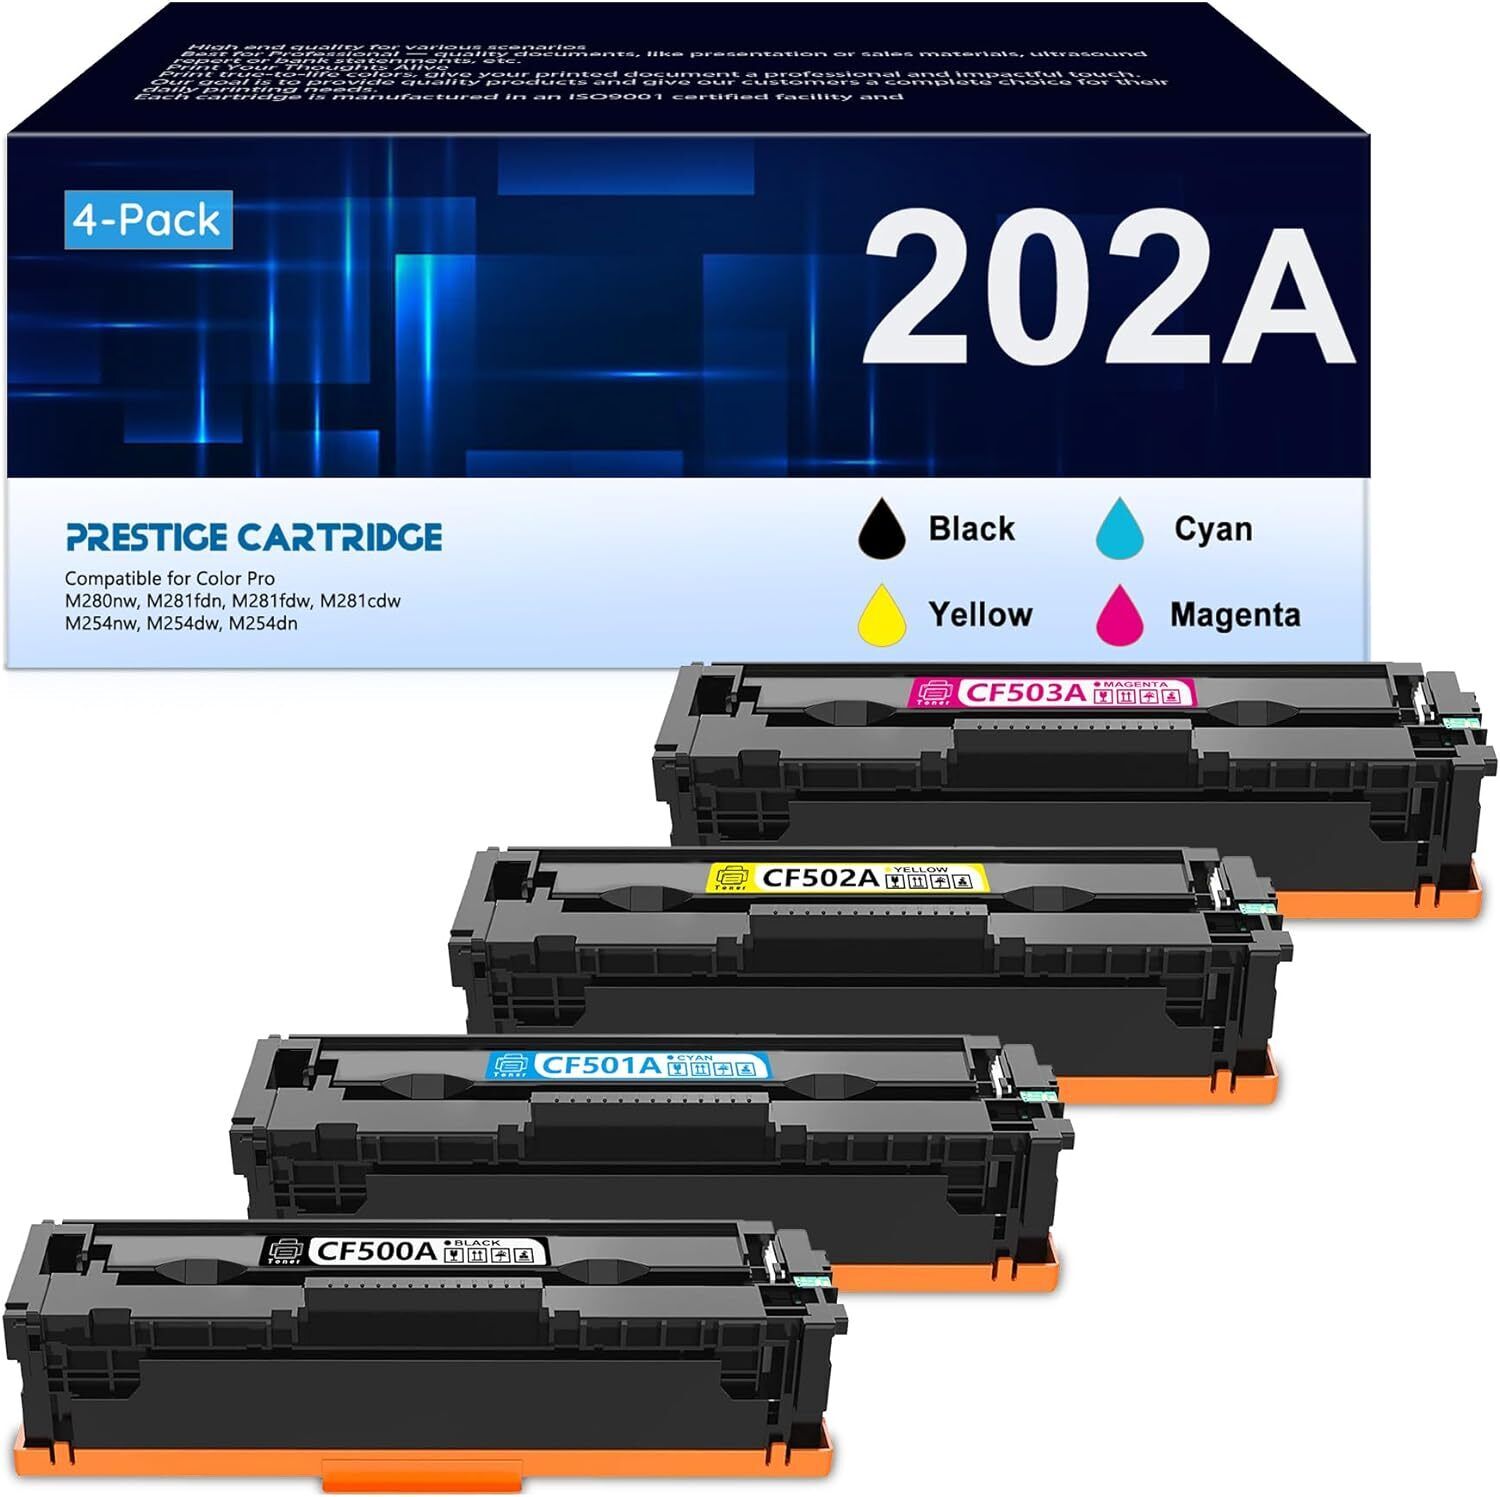 202A Toner Cartridge with Chip Replacement for HP Pro M254dw M254dn M254nw